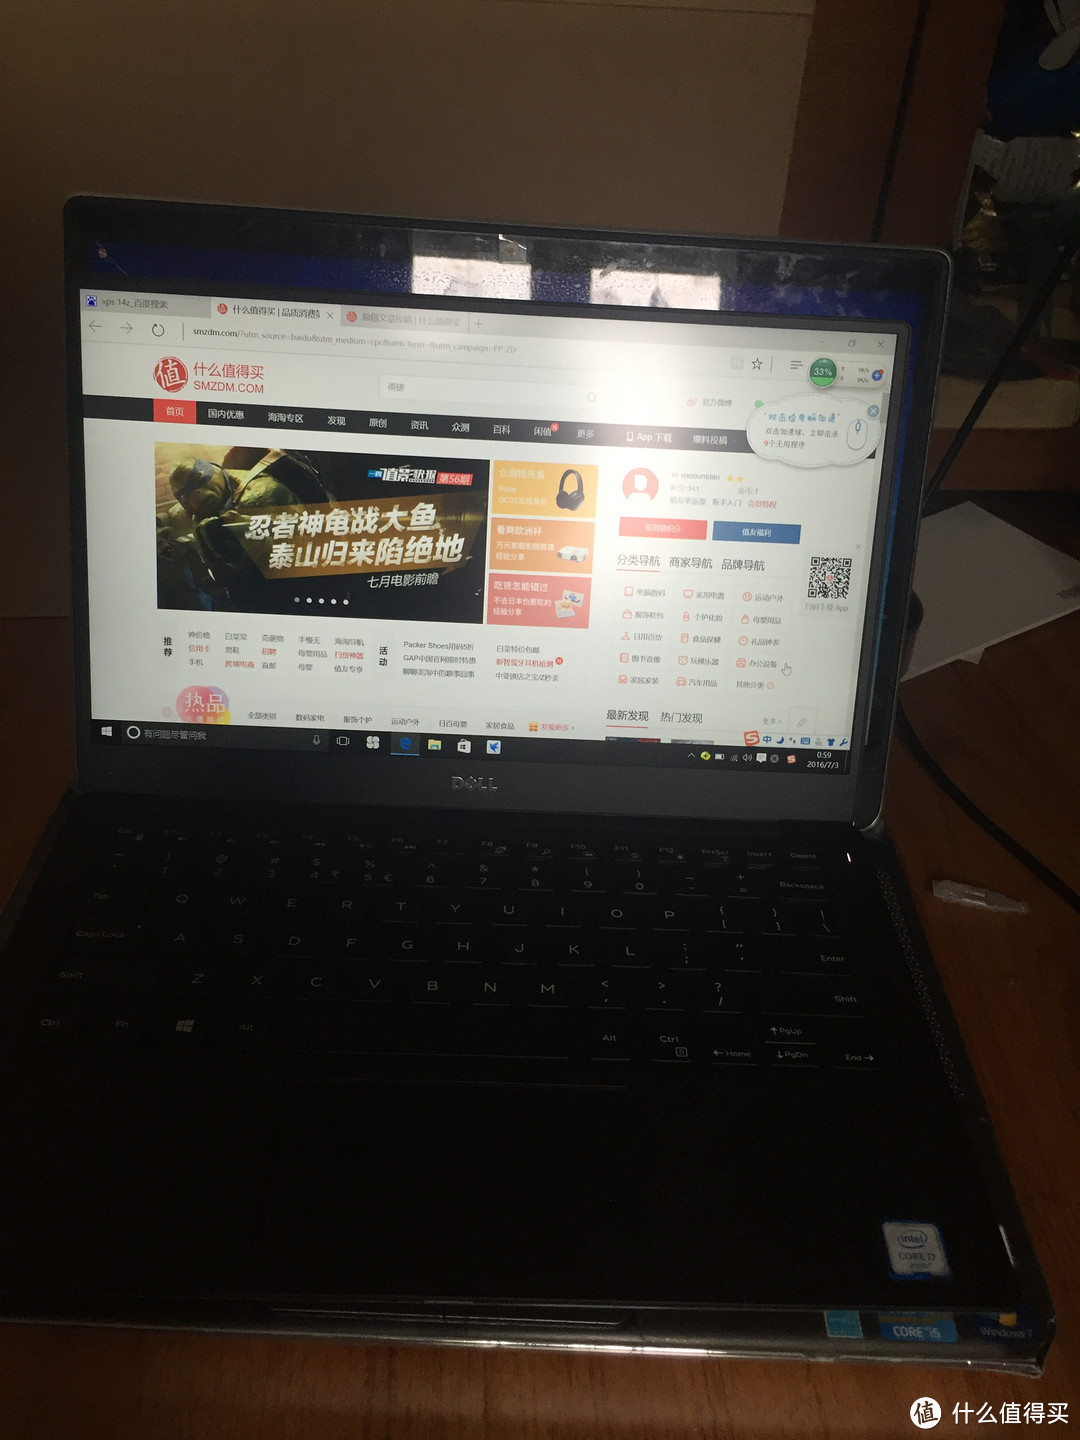 DELL 戴尔 XPS 13-9350-3708S 笔记本电脑 开晒